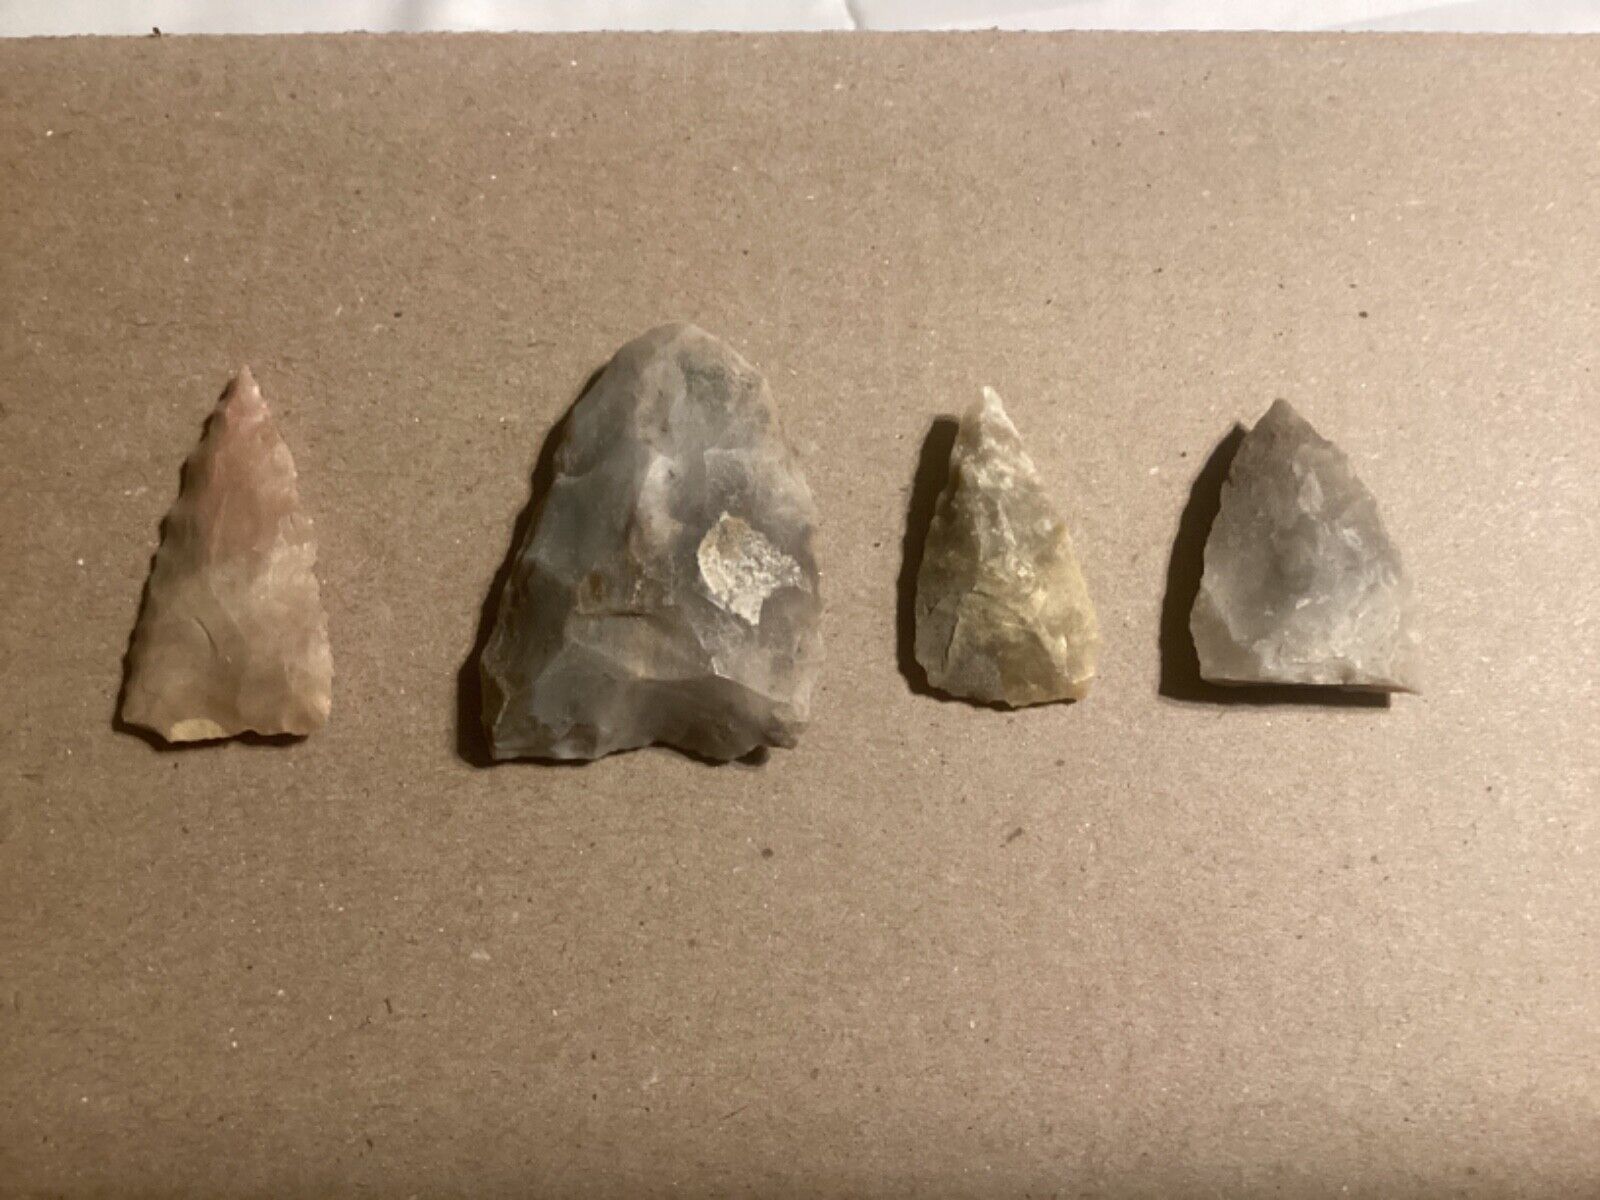 Texas Arrowheads Artifacts authentic and found by me